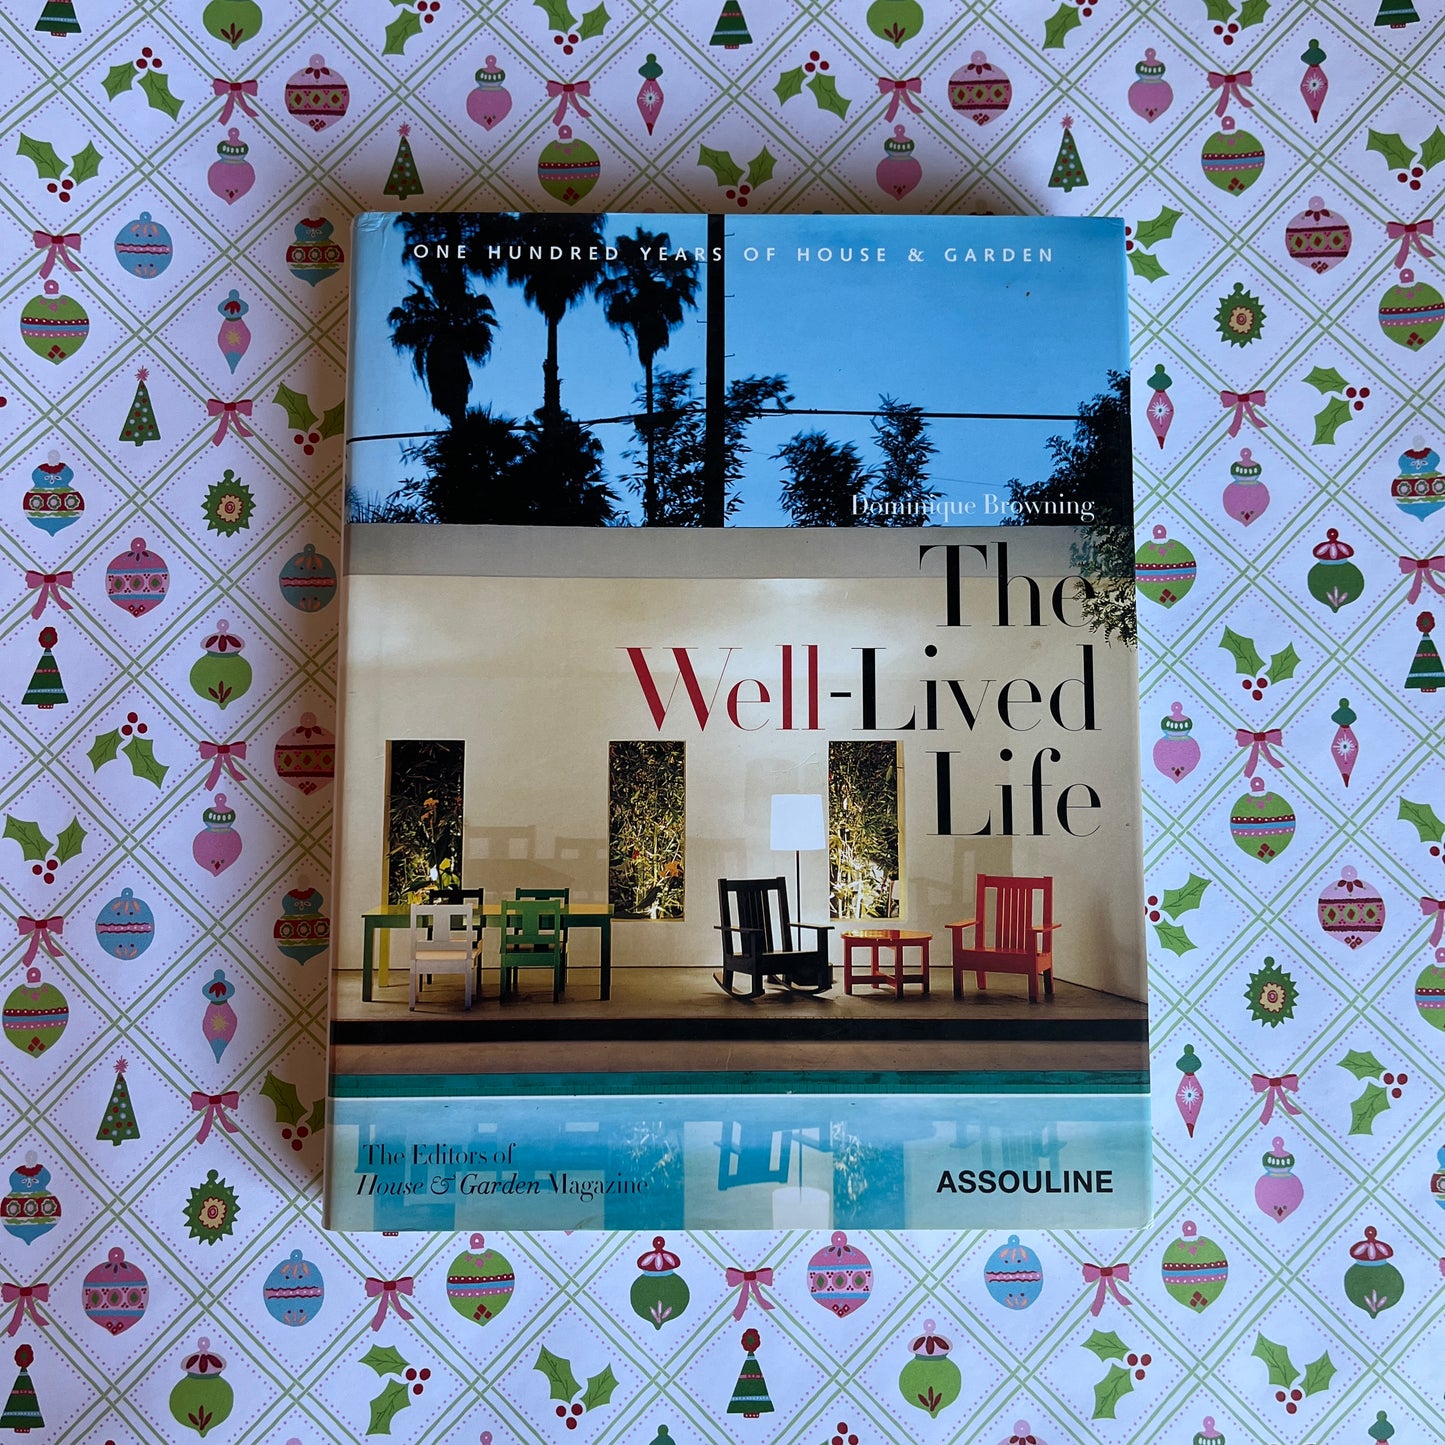 Signed Copy, The Well-Lived Life Hardcover Book